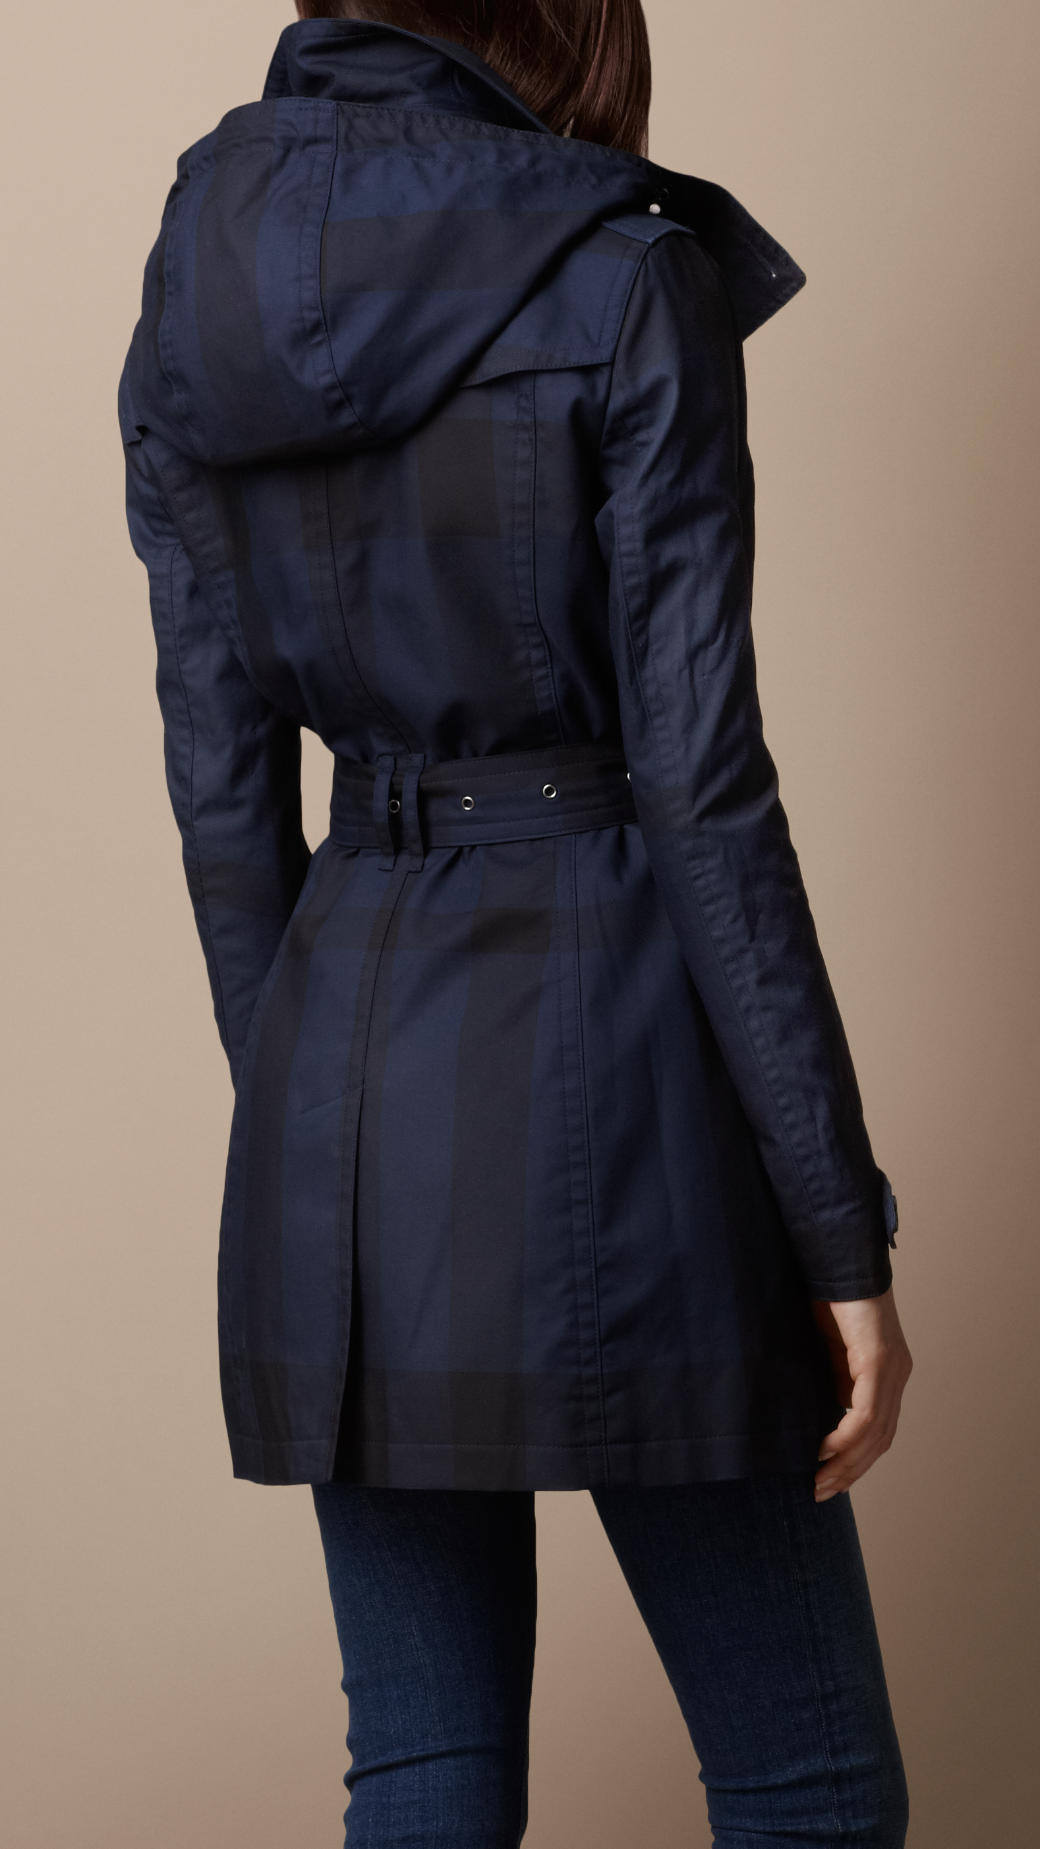 Lyst - Burberry Brit Long Cotton Check Trench Coat in Blue